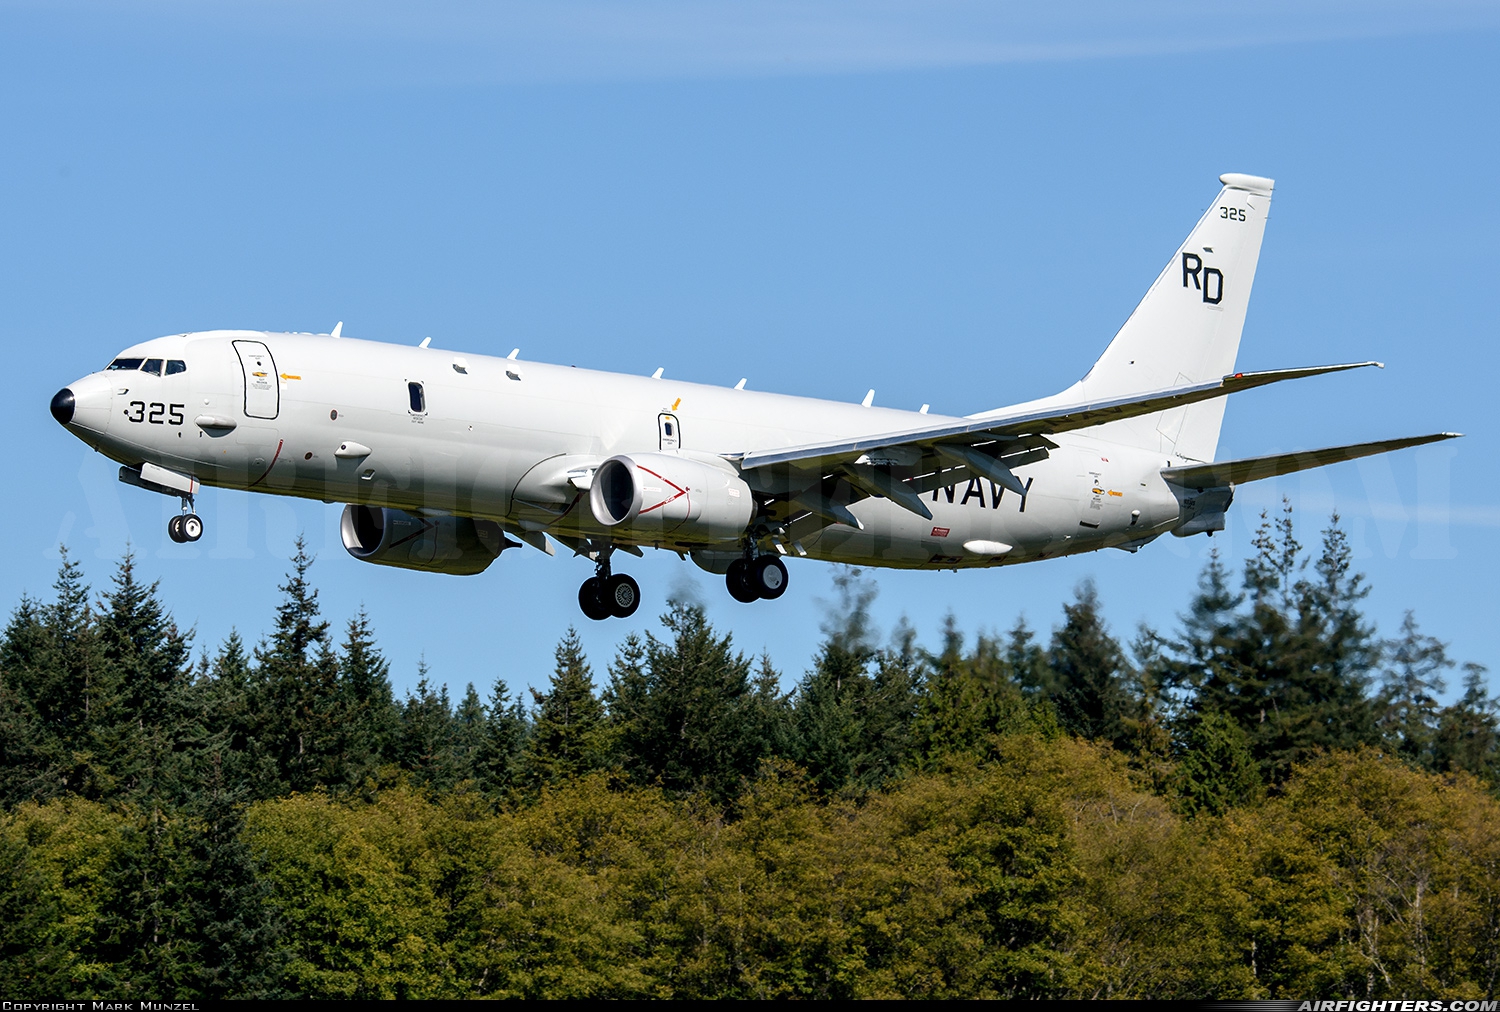 USA - Navy Boeing P-8A Poseidon (737-800ERX) 169325 at Oak Harbor - Whidbey Island NAS / Ault Field (NUW), USA